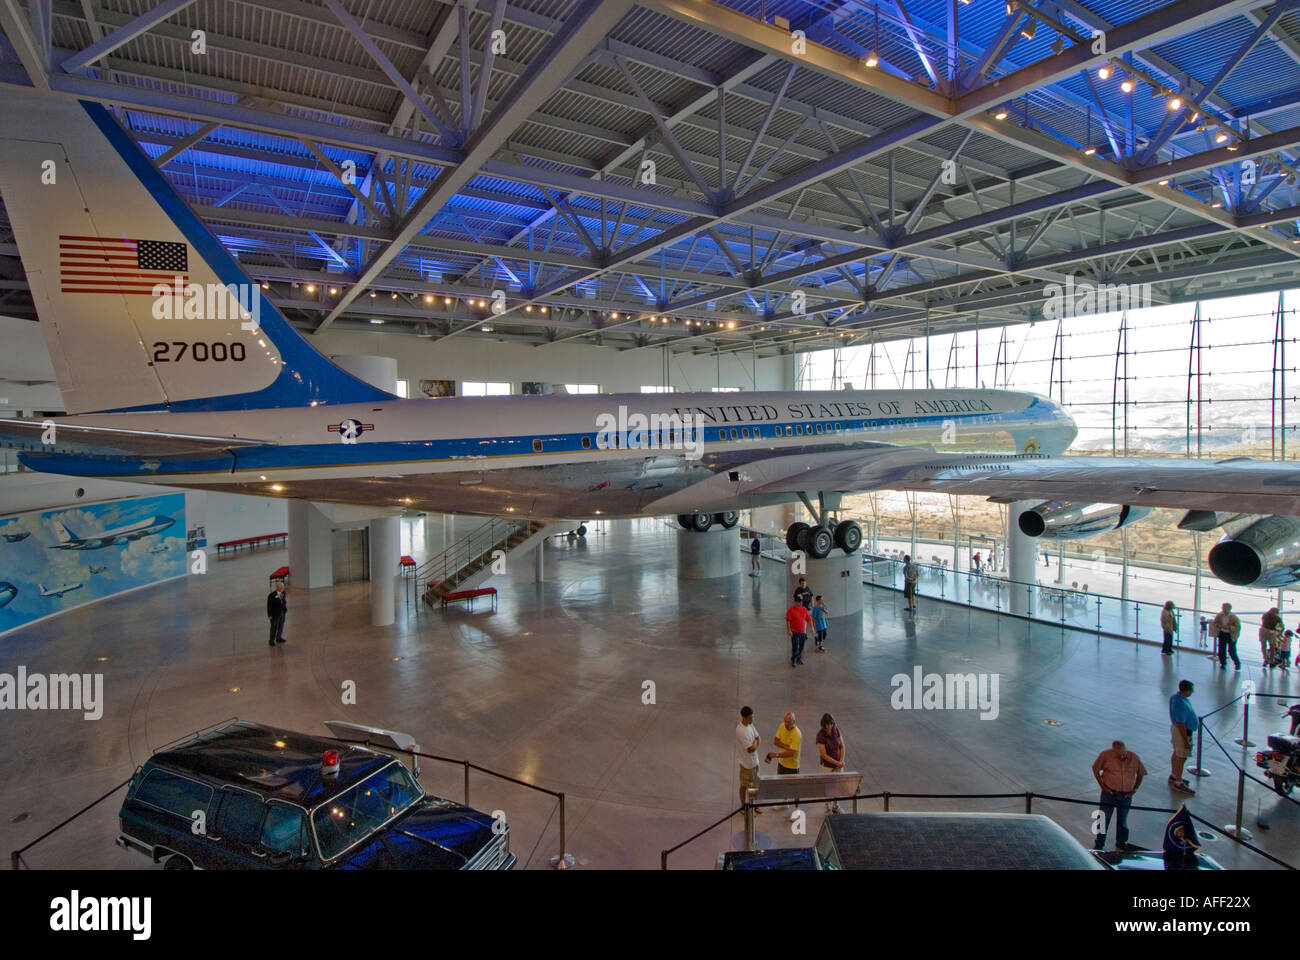 California Simi Valley Ronald W Reagan Presidental Library and Museum Air Force One Pavilion presidential aircraft Stock Photo